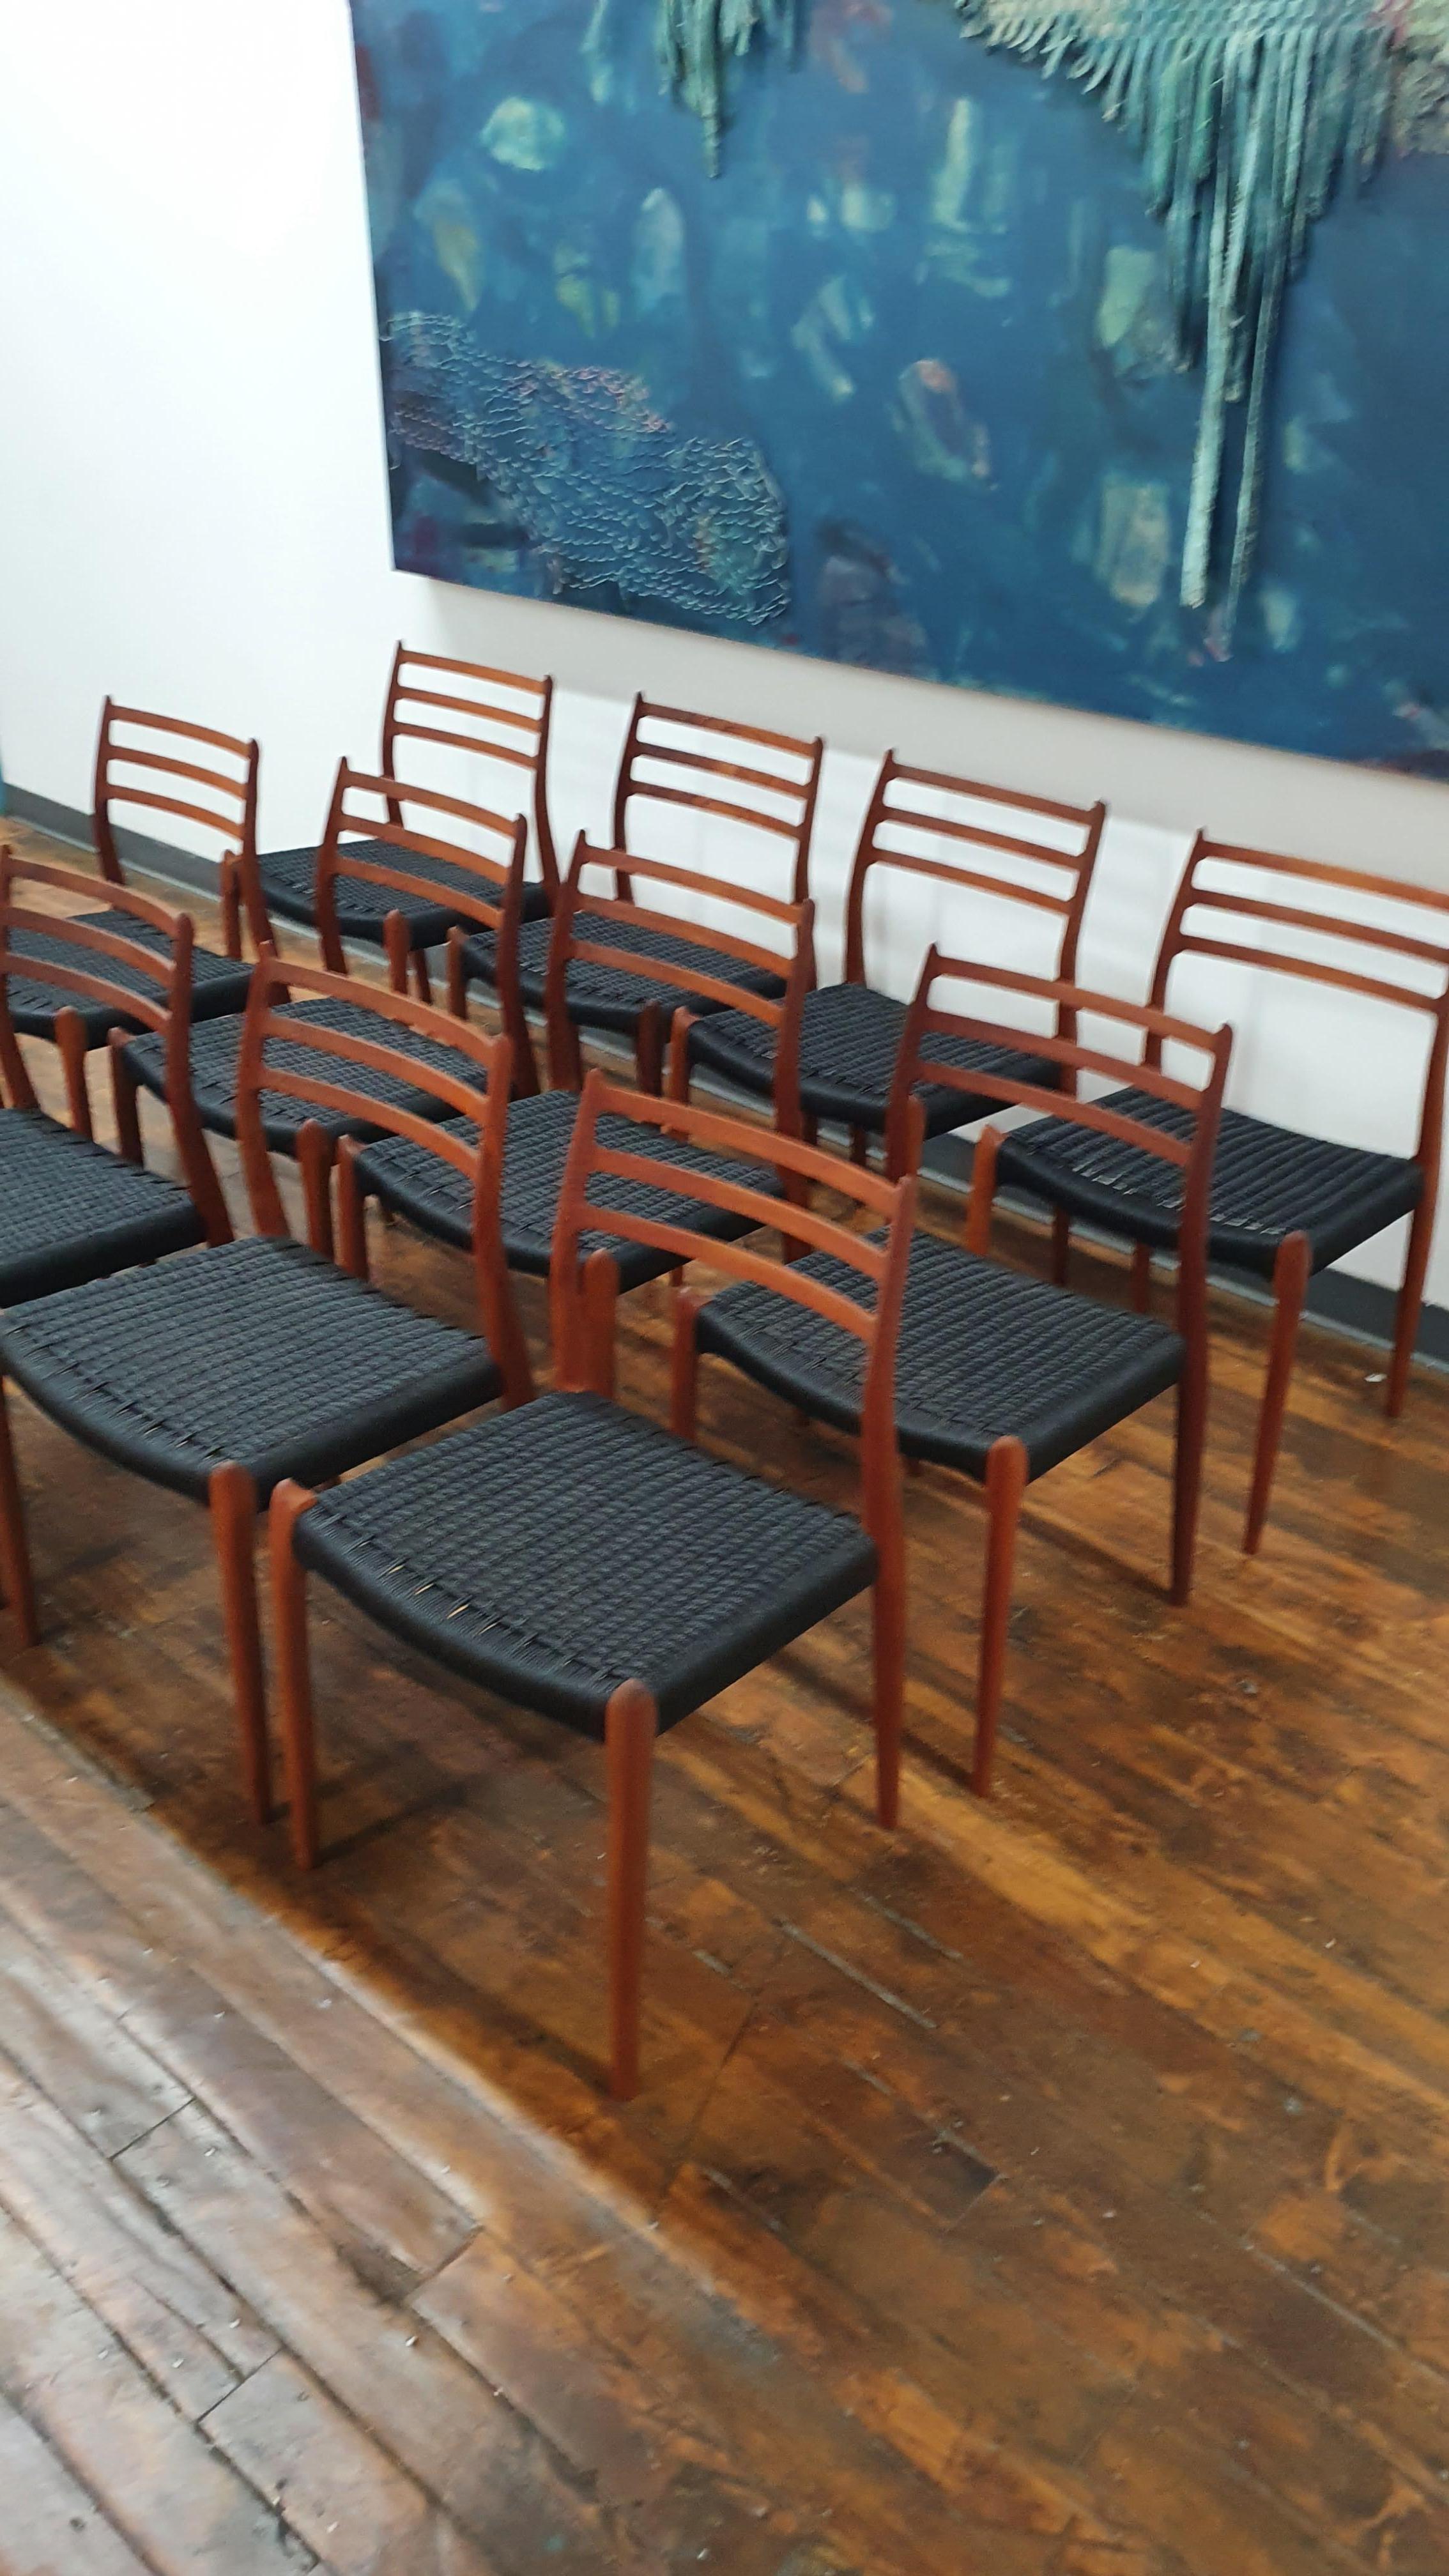 Beautiful set of 12 moller chairs, model 78 with new black danish cord. These chairs have been refinished and reoiled. There are some scratches and gouges in parts of the wood that give the excellent vintage patina while having the benefits of being